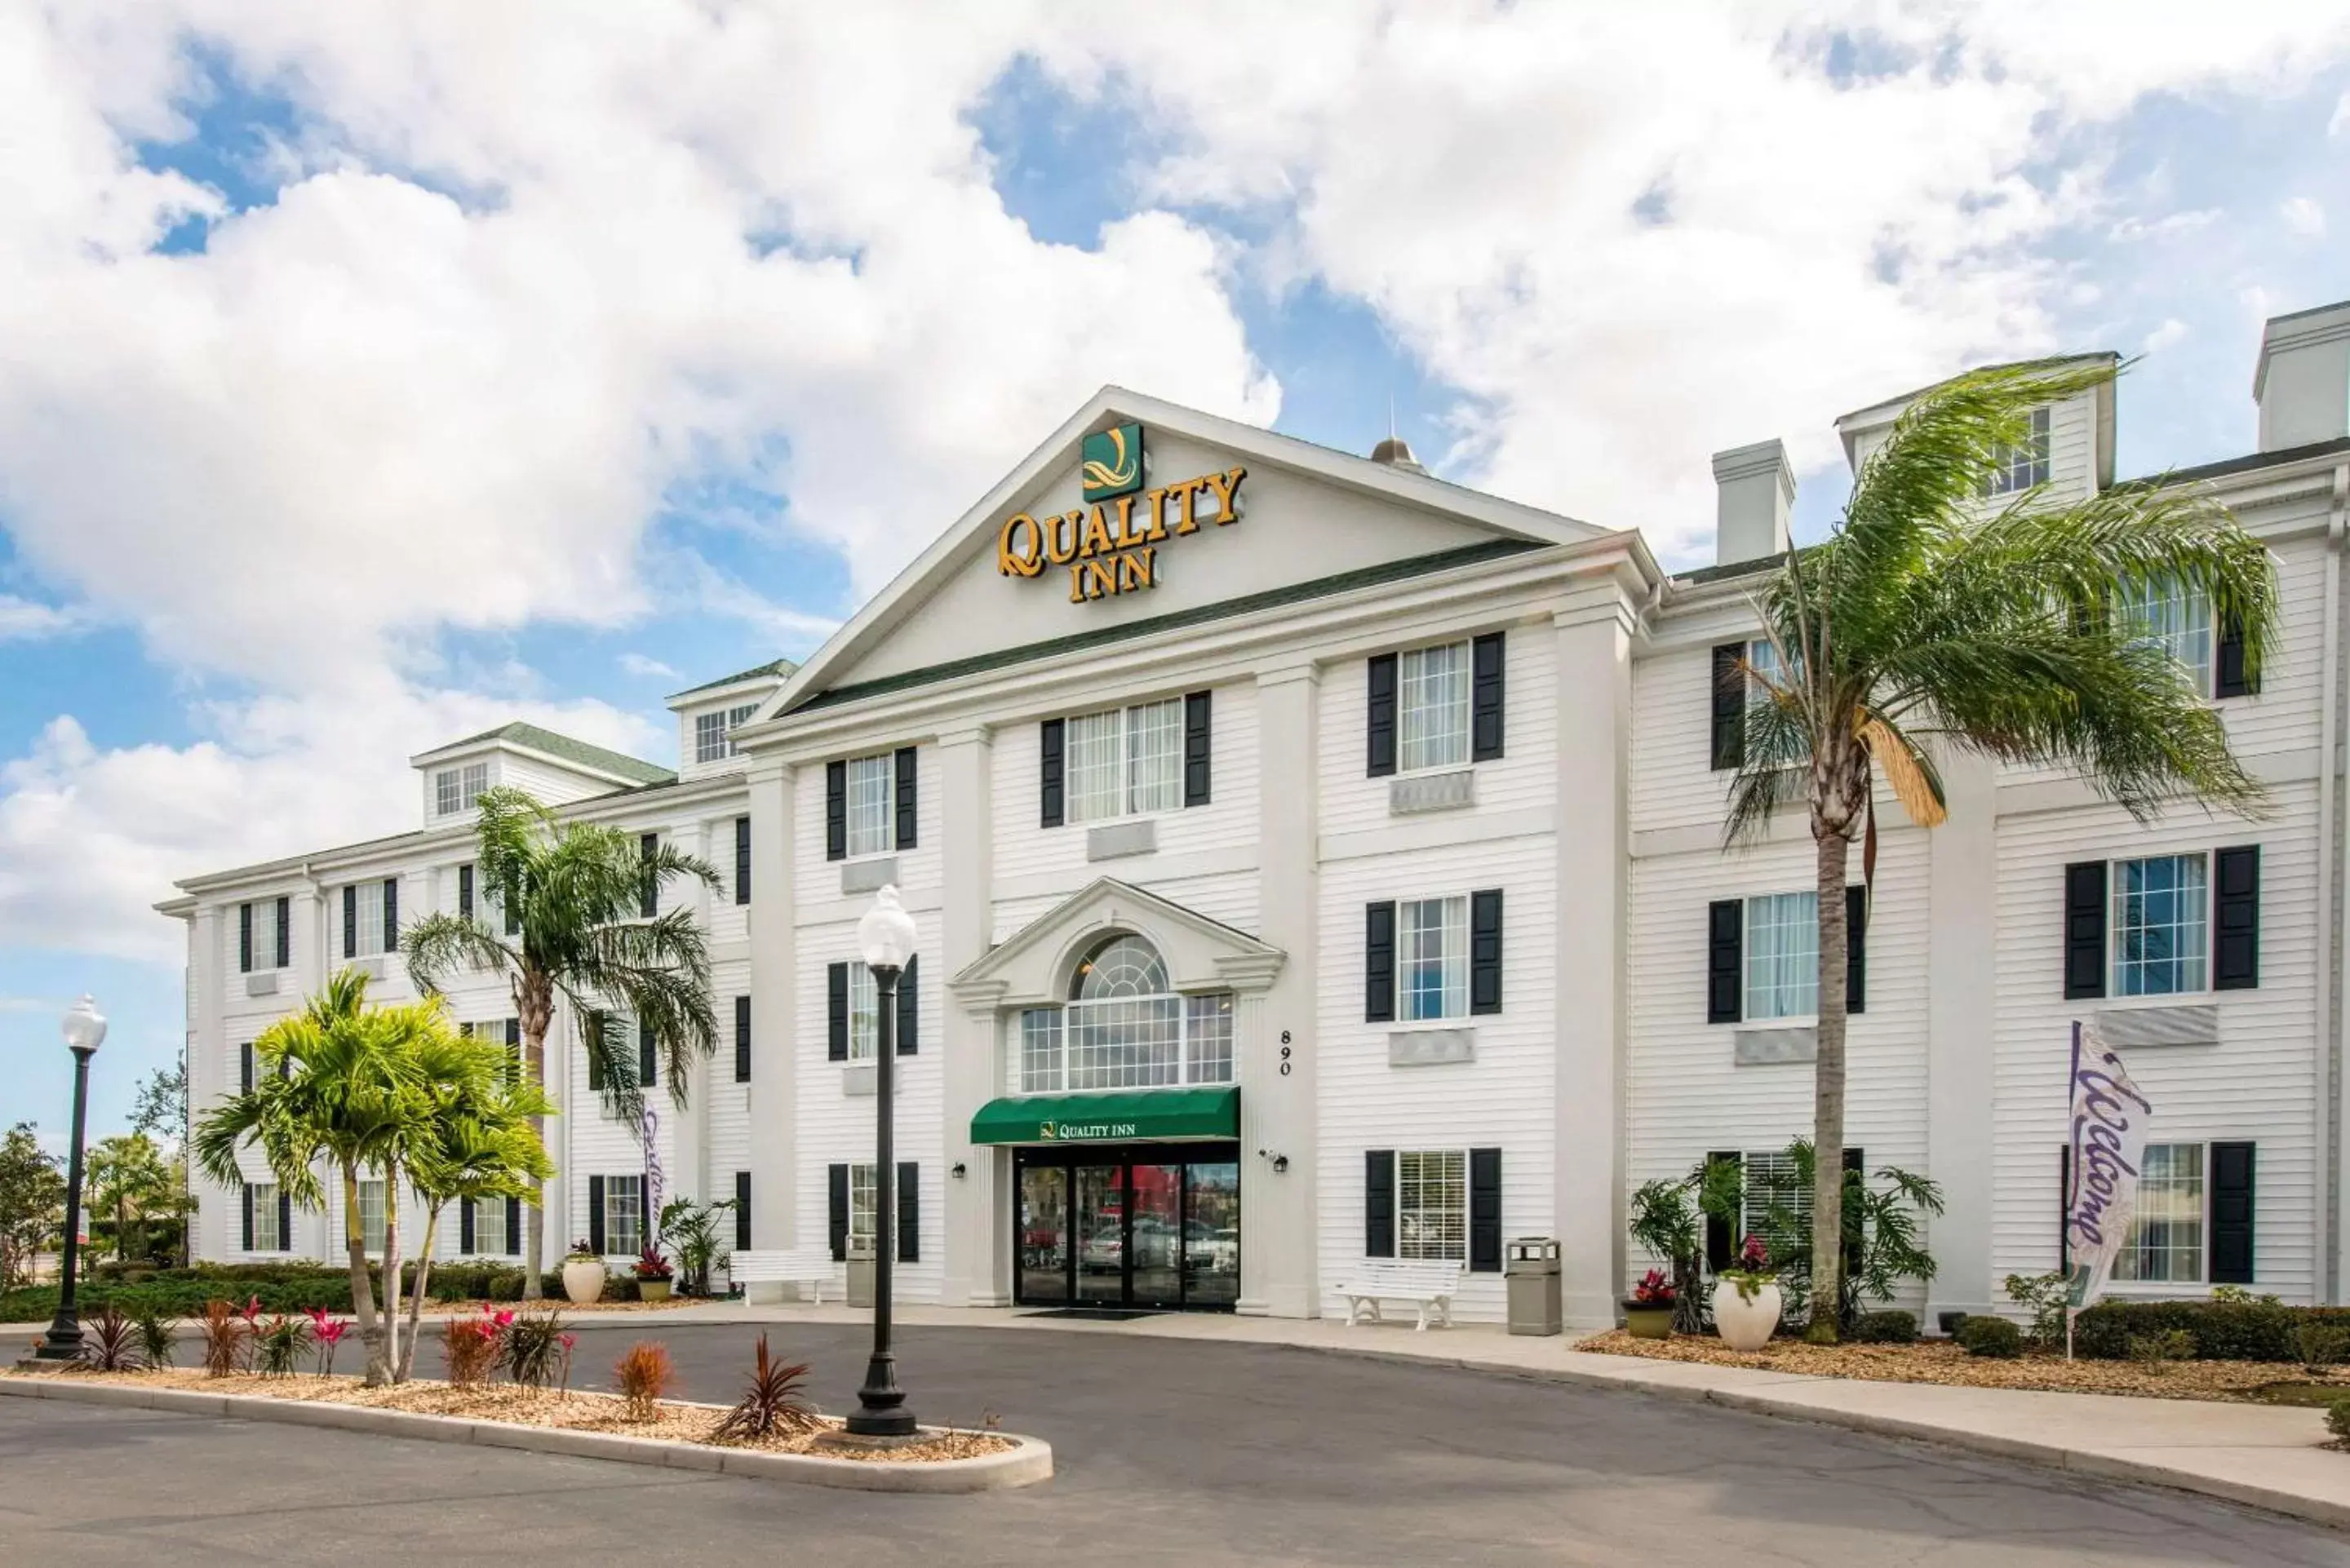 Property Building in Quality Inn Palm Bay - Melbourne I-95